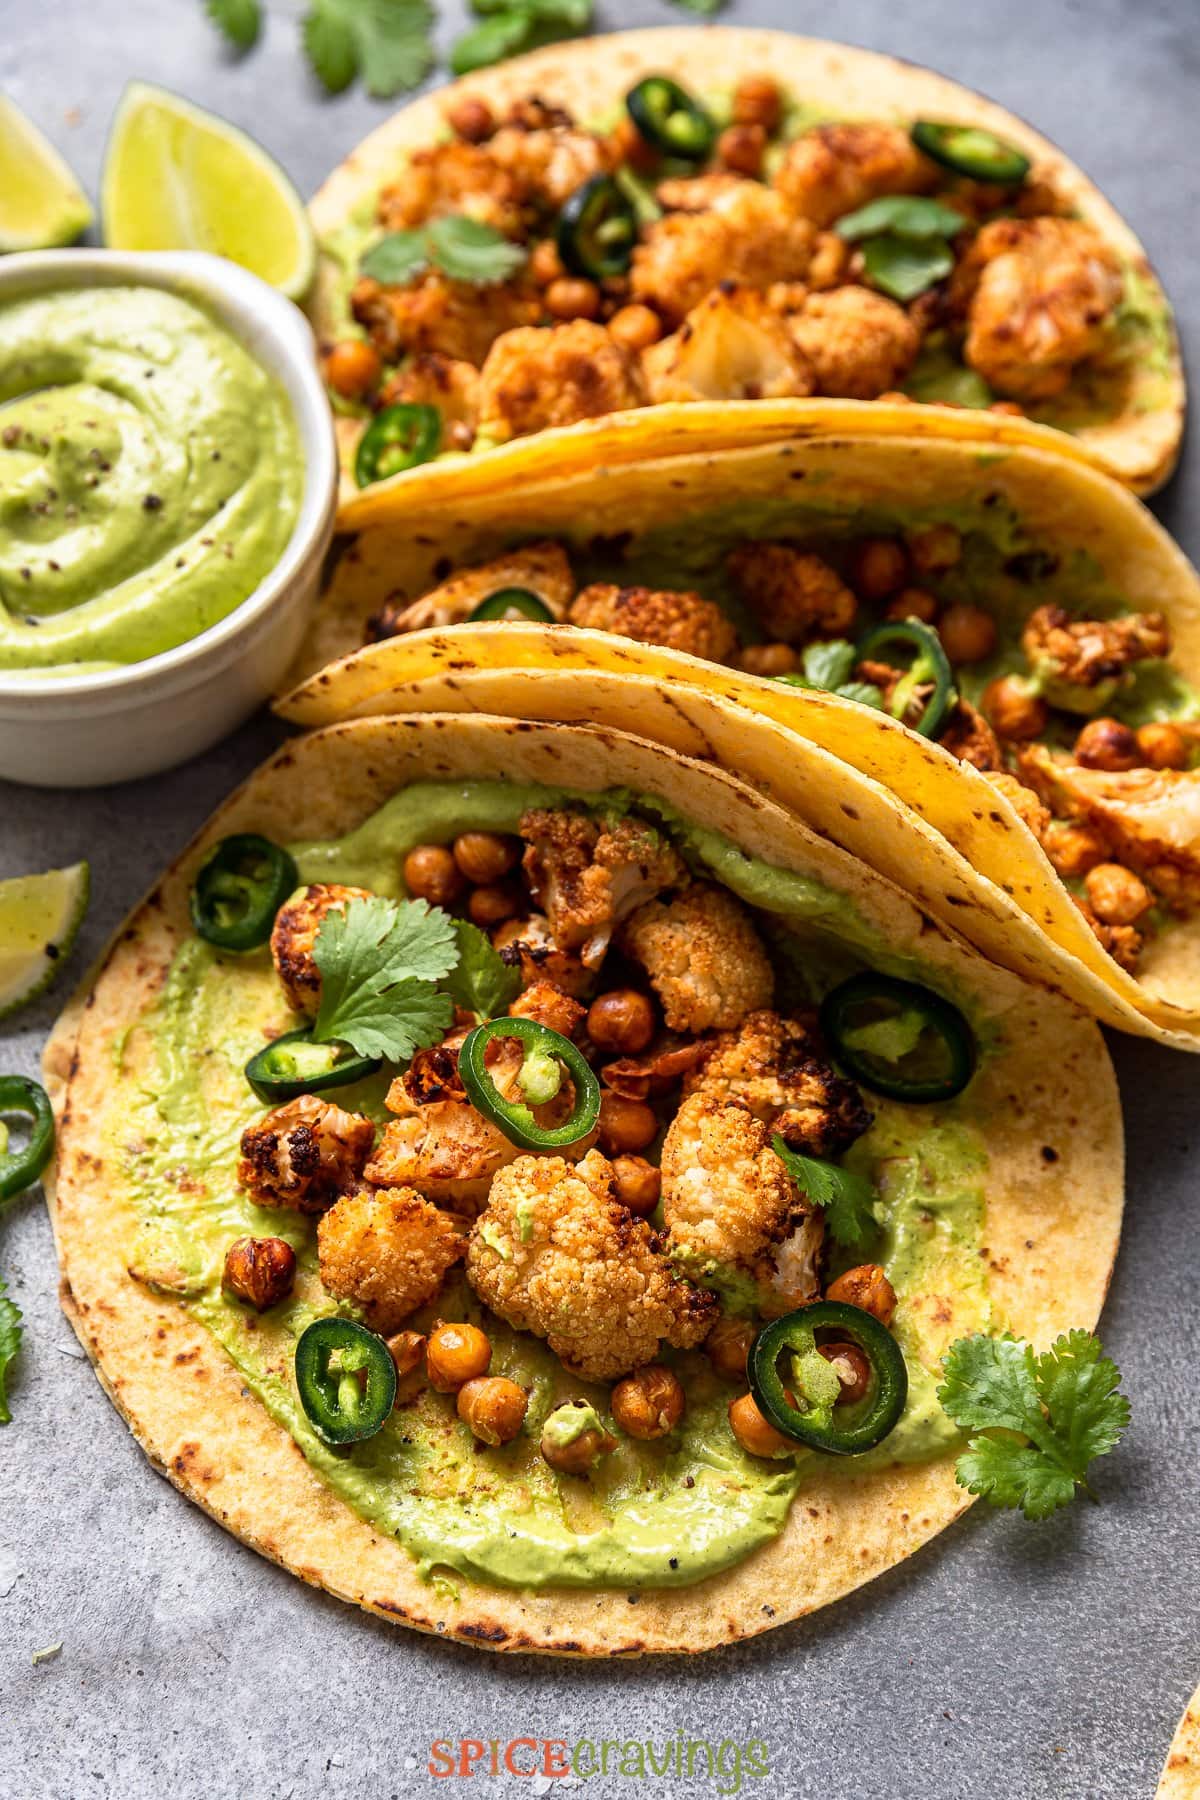 three cauliflower tacos with chickpeas and green goddess sauce on side